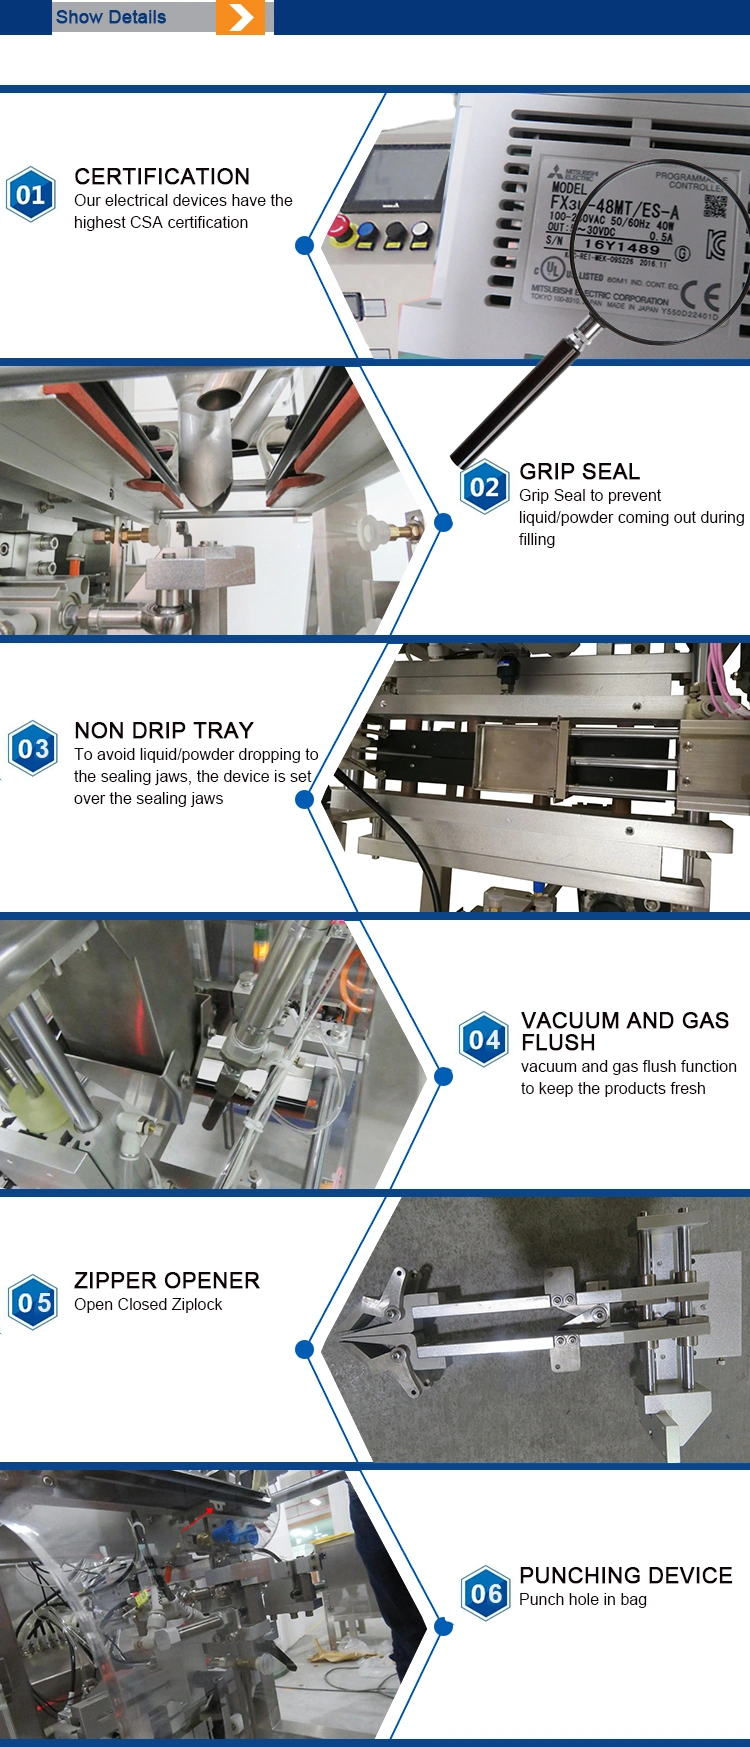 Pre Made Bag Automatic Filling Packing Machine for Salad Dressing Liquid Doy Pack